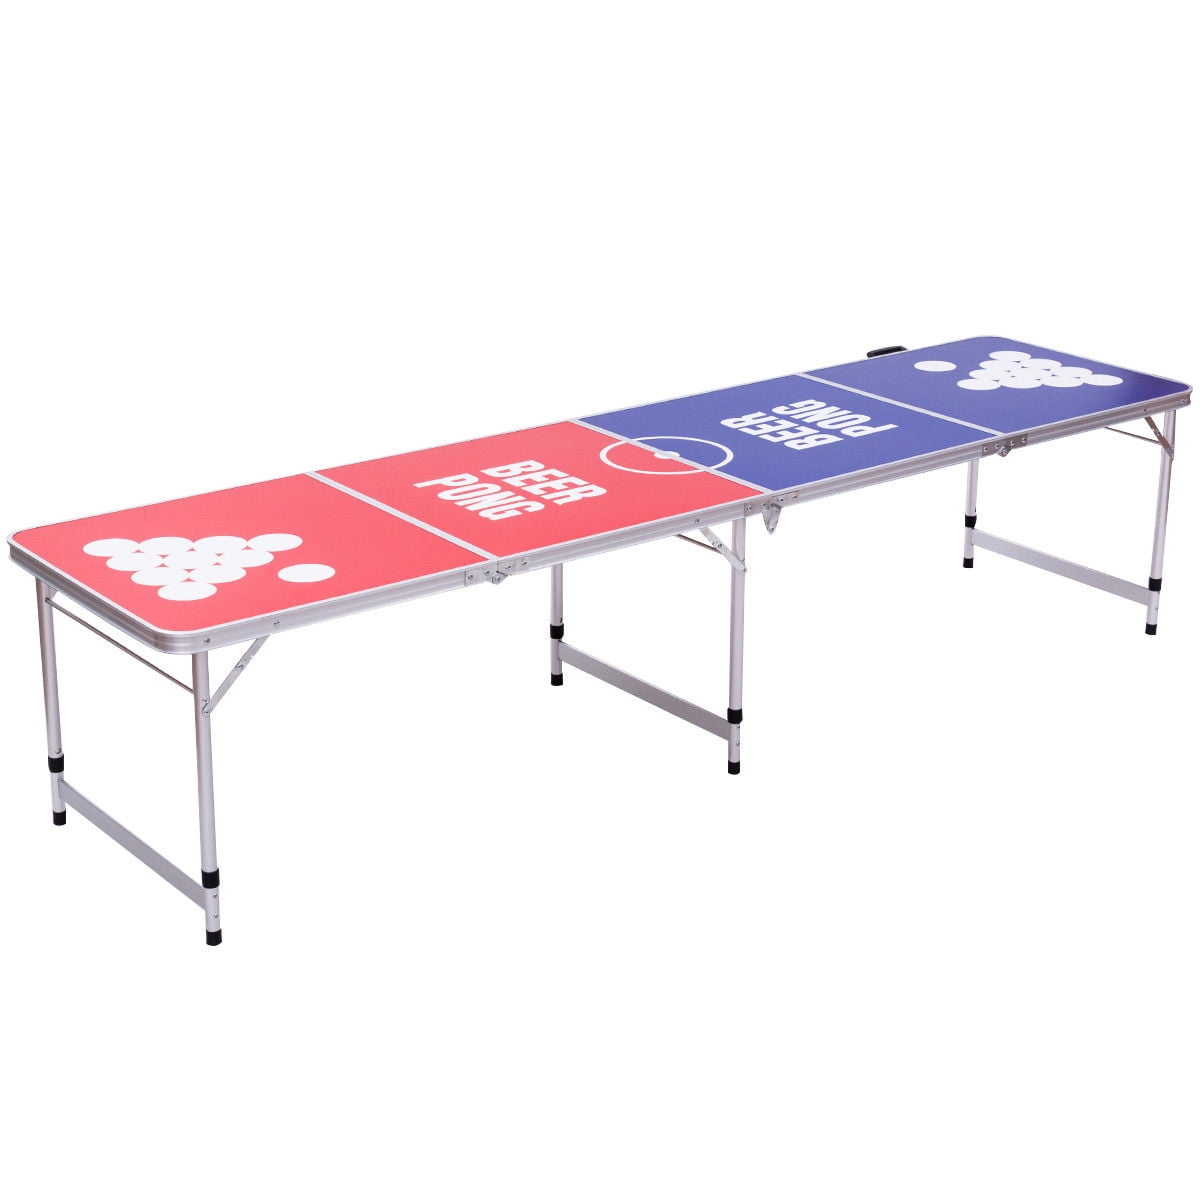 New 8FT Aluminum Folding Beer Pong Table for Camping Picnic Outdoor Party Games 